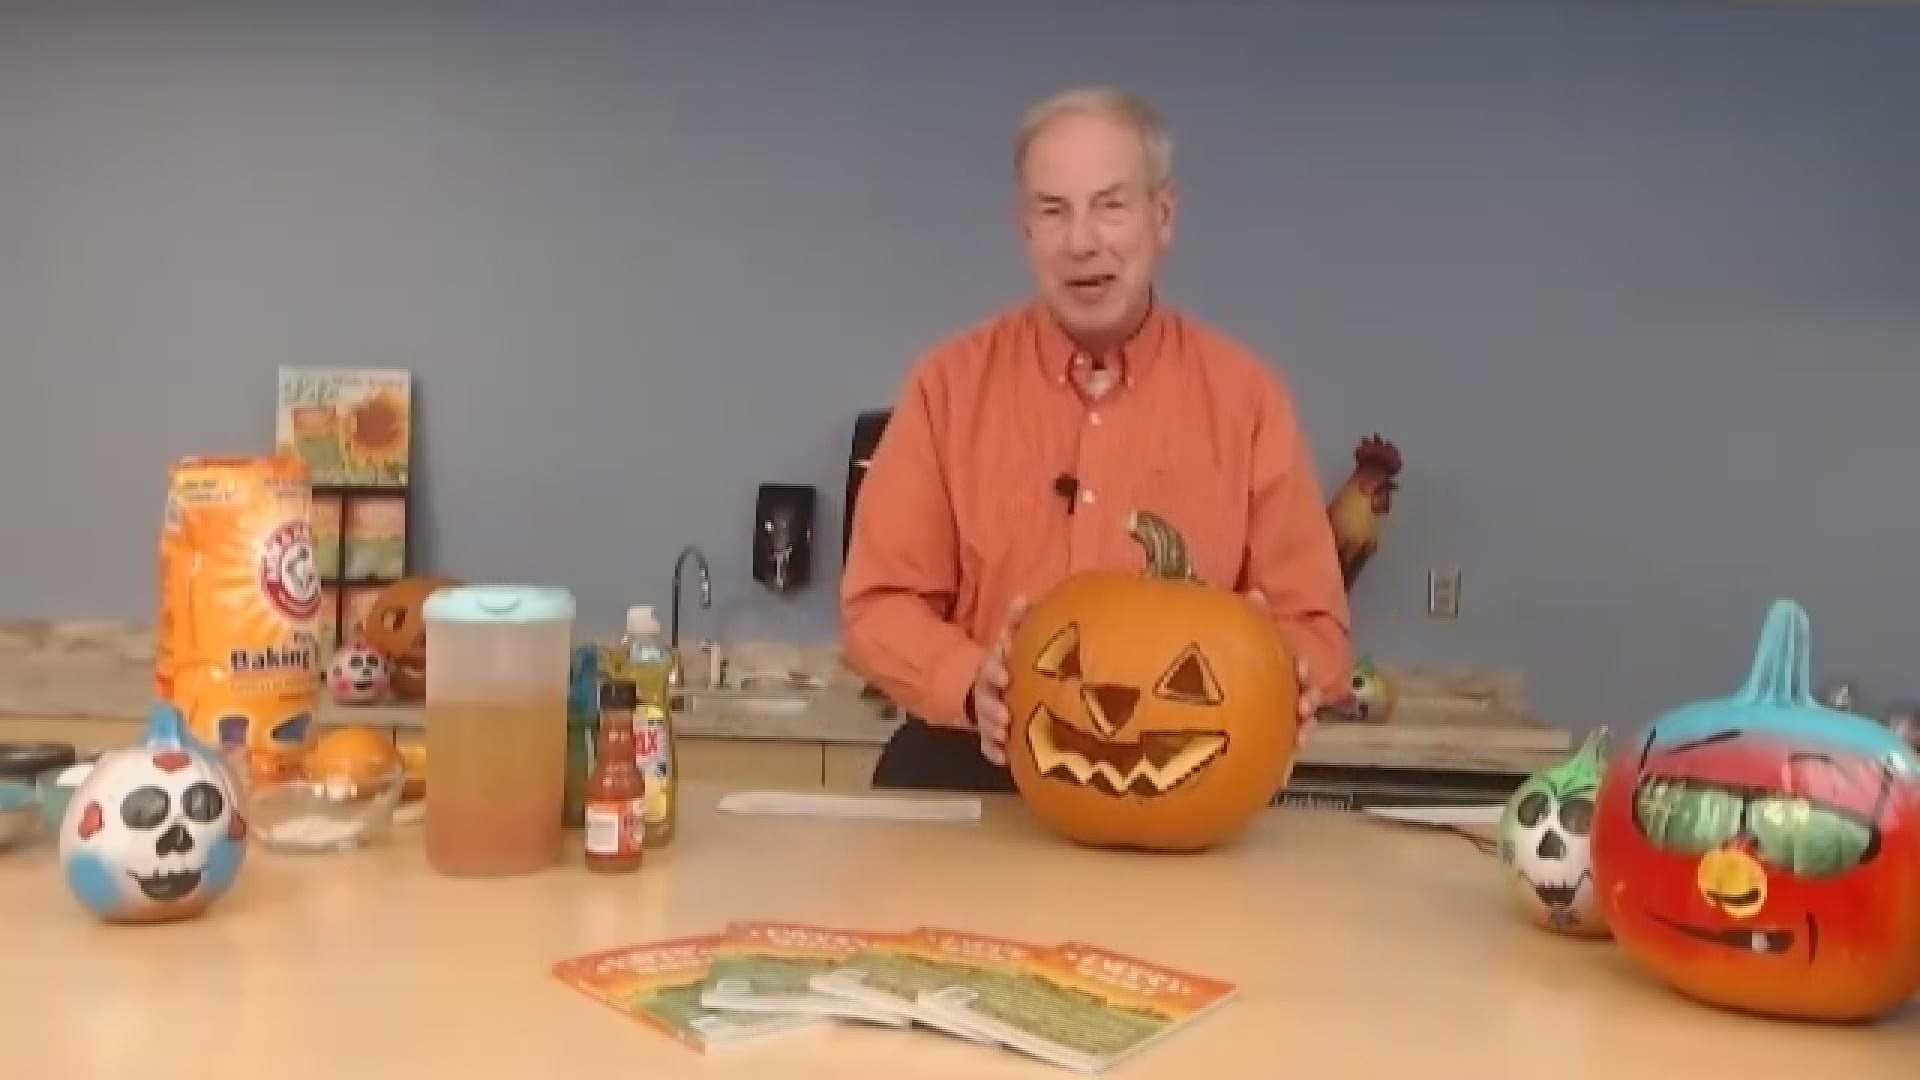 Peter Geiger, editor for the Farmers' Almanac, shares a few 'life hacks' using items we'd typically eat.